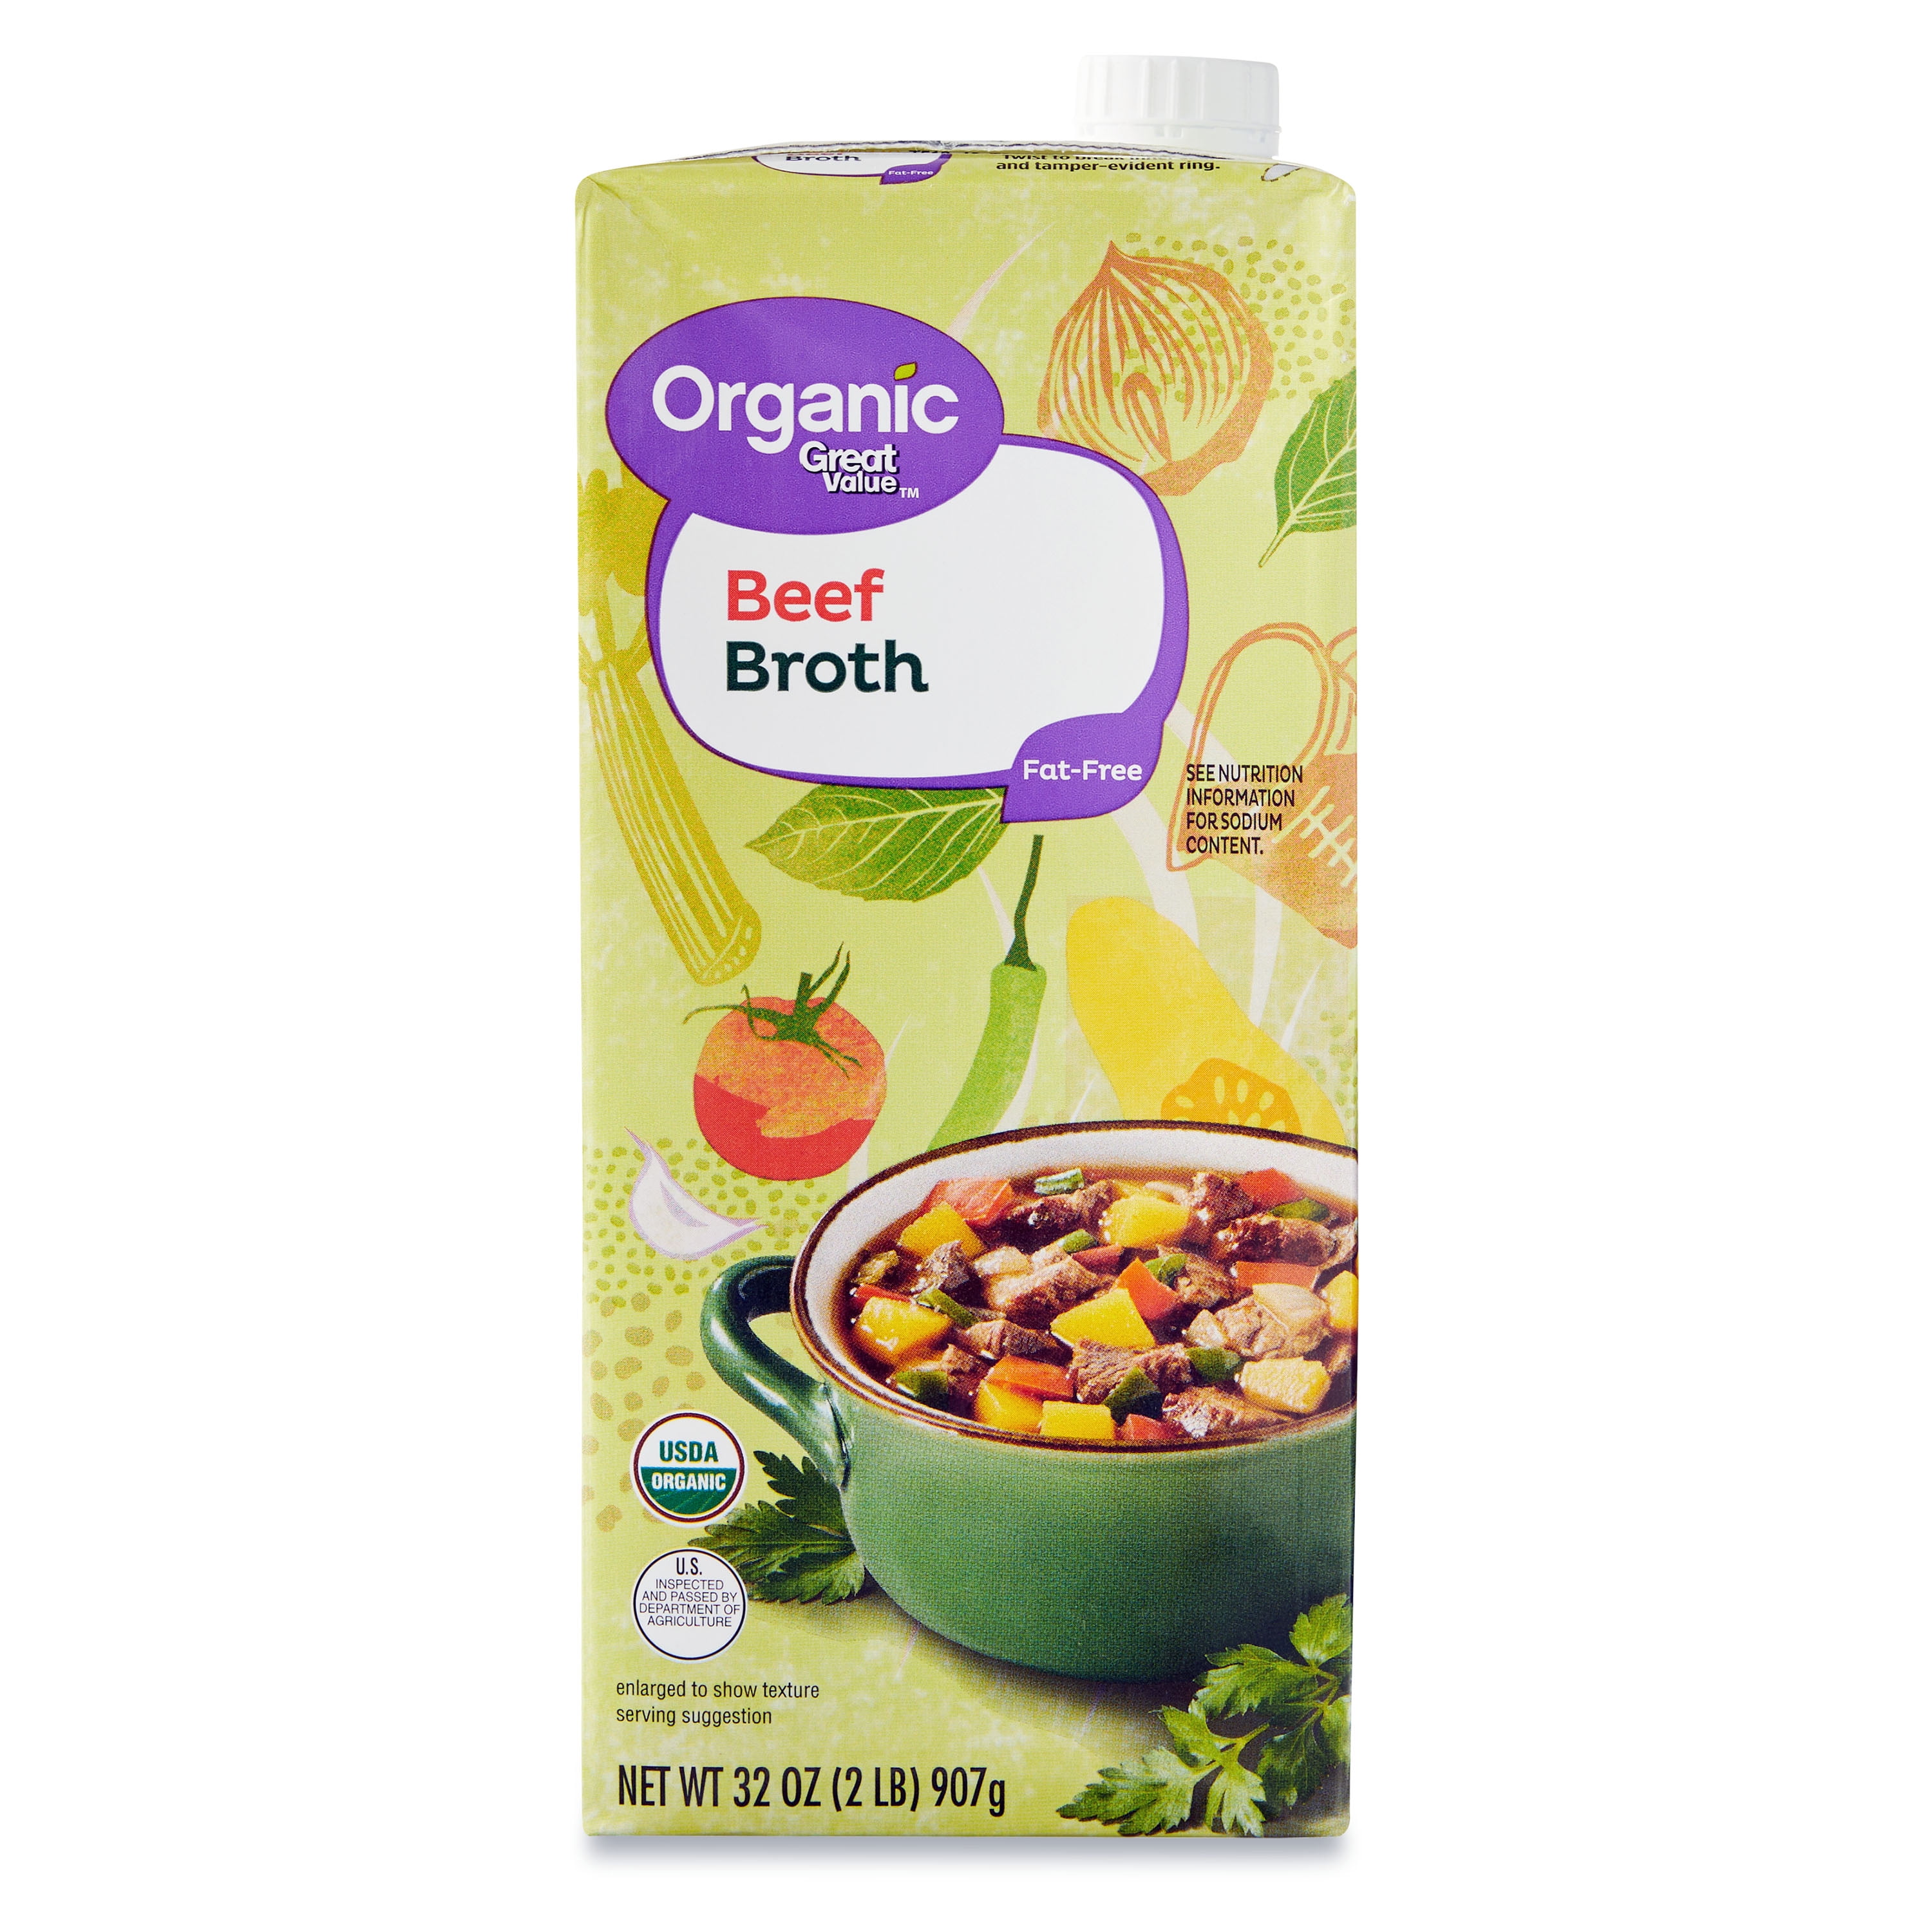 Great Value Organic Beef Flavored Broth, 32 oz